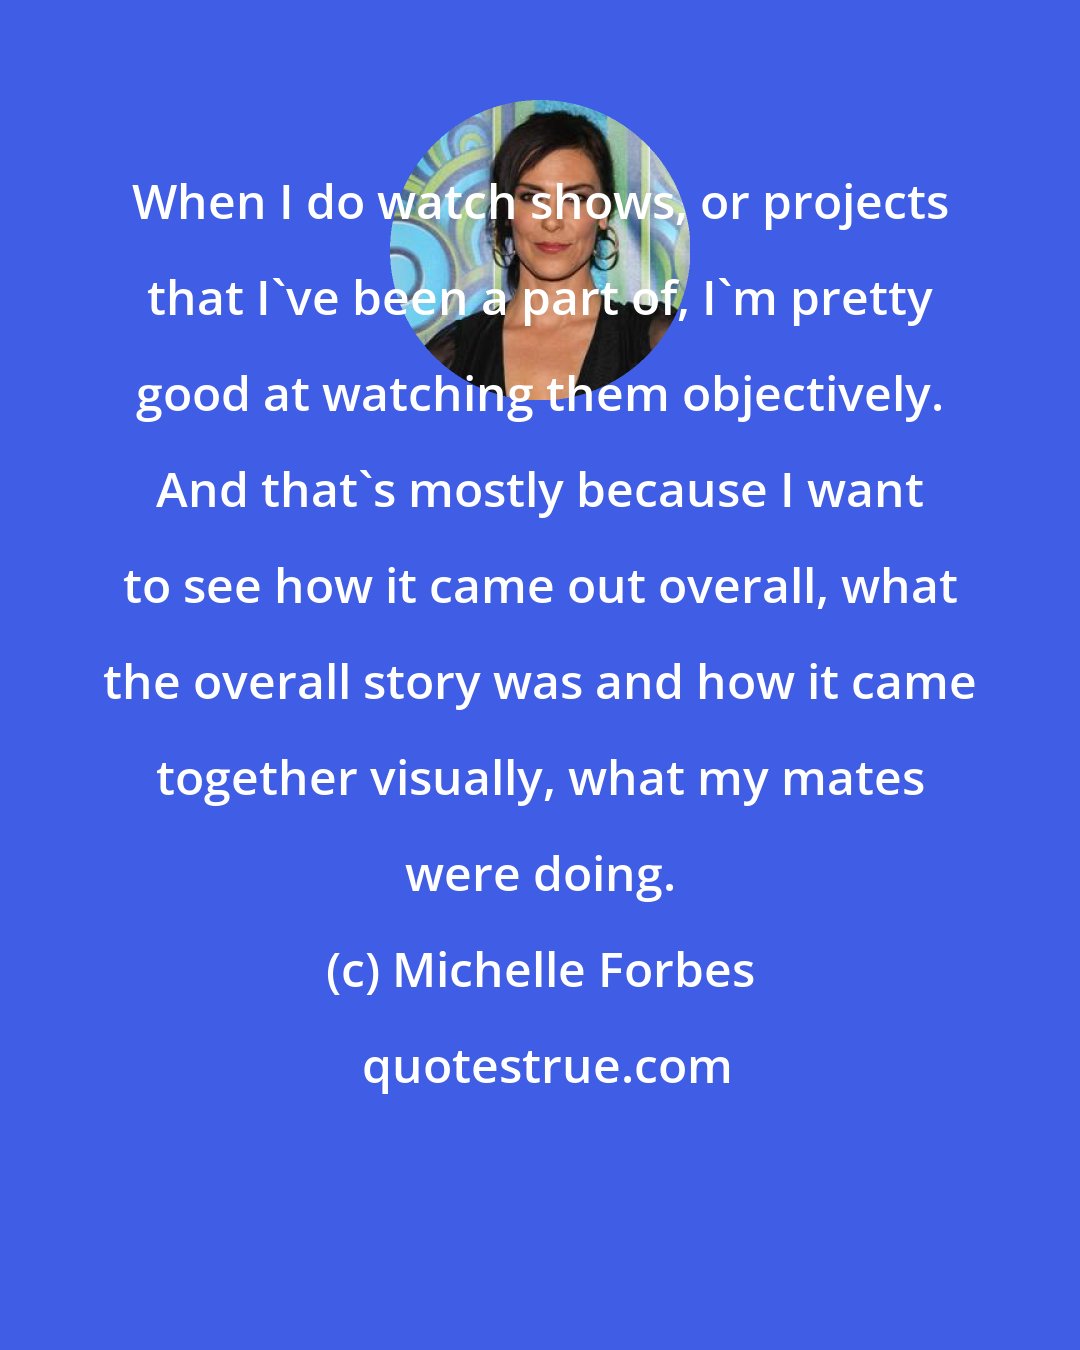 Michelle Forbes: When I do watch shows, or projects that I've been a part of, I'm pretty good at watching them objectively. And that's mostly because I want to see how it came out overall, what the overall story was and how it came together visually, what my mates were doing.